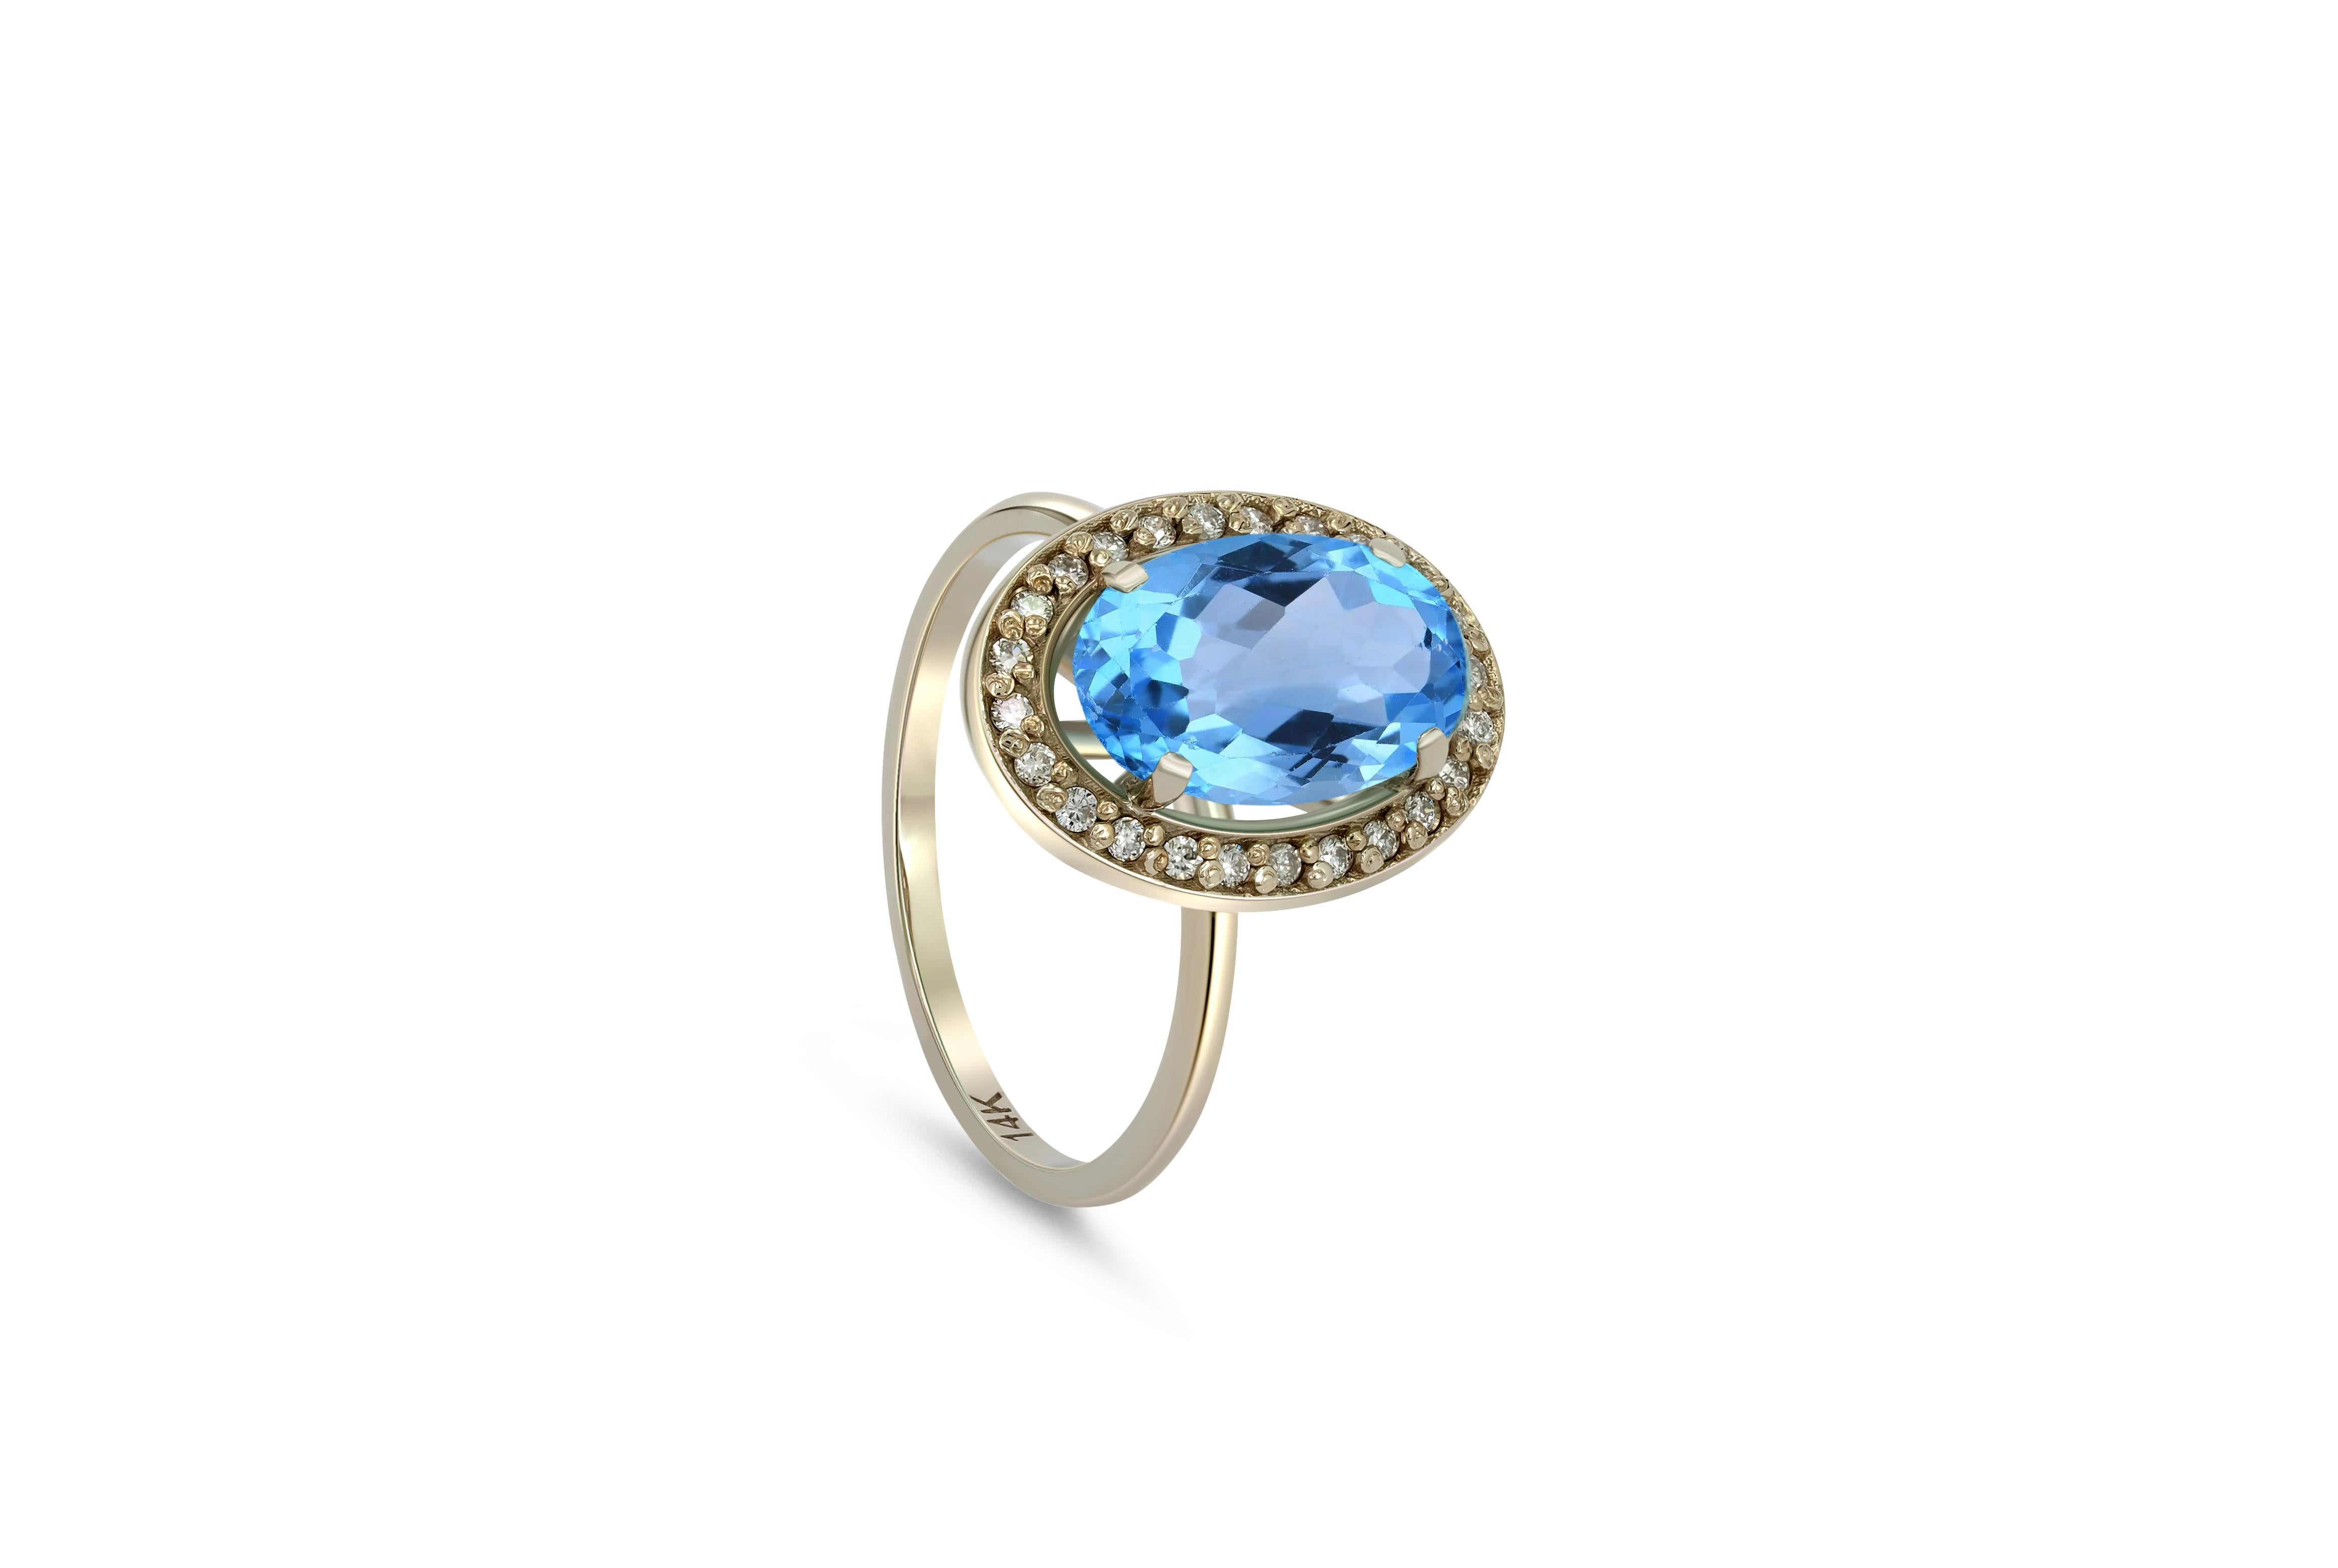 For Sale:  Topaz and diamonds 14k gold ring. 2